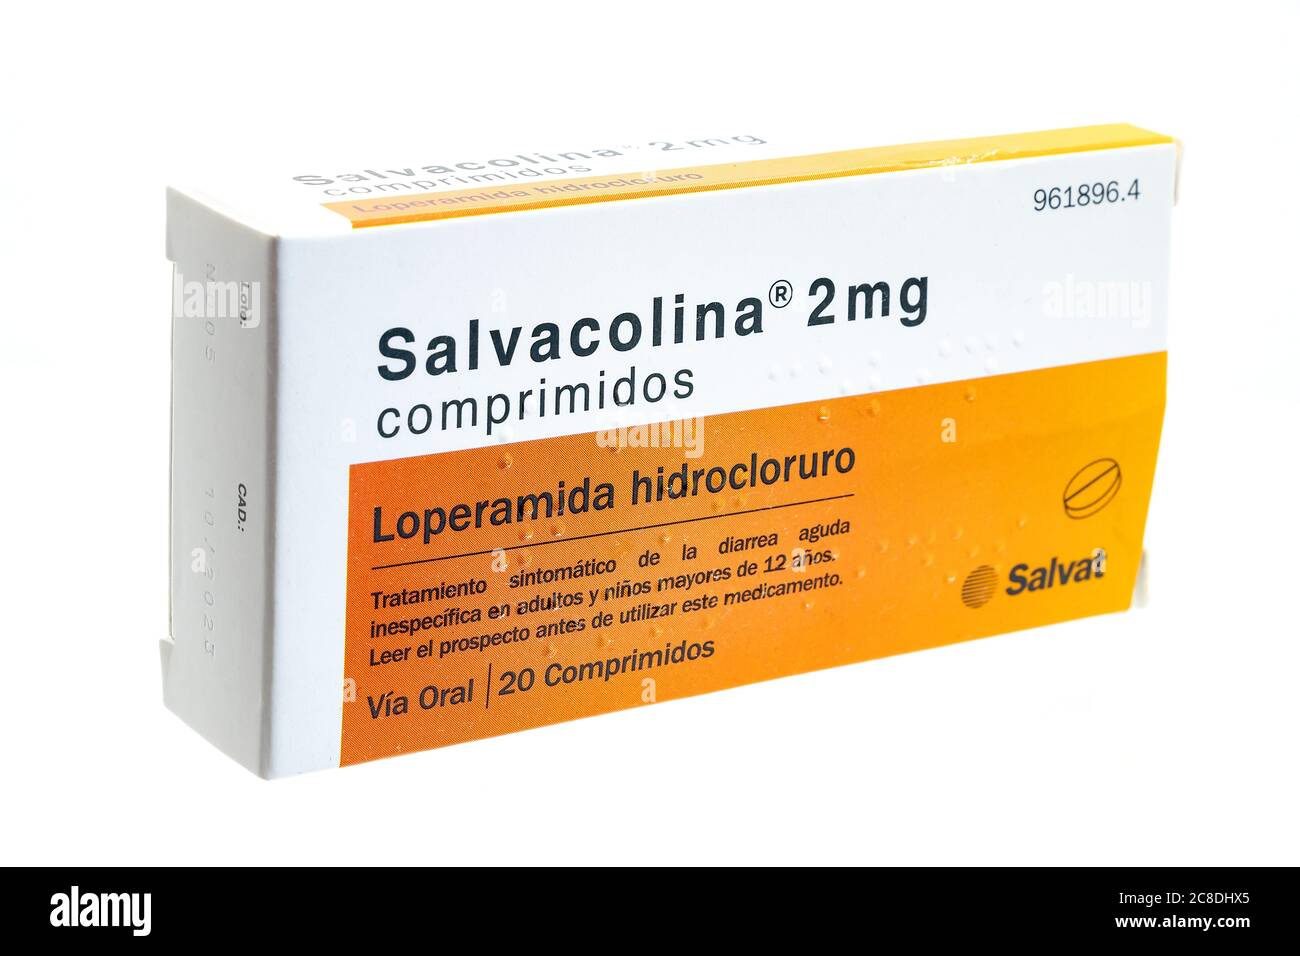 Huelva, Spain - July 23, 2020: Spanish Box of Salvacolina. loperamide hydrochloride.Is a medicine to treat diarrhoea (runny poo).It can help with shor Stock Photo